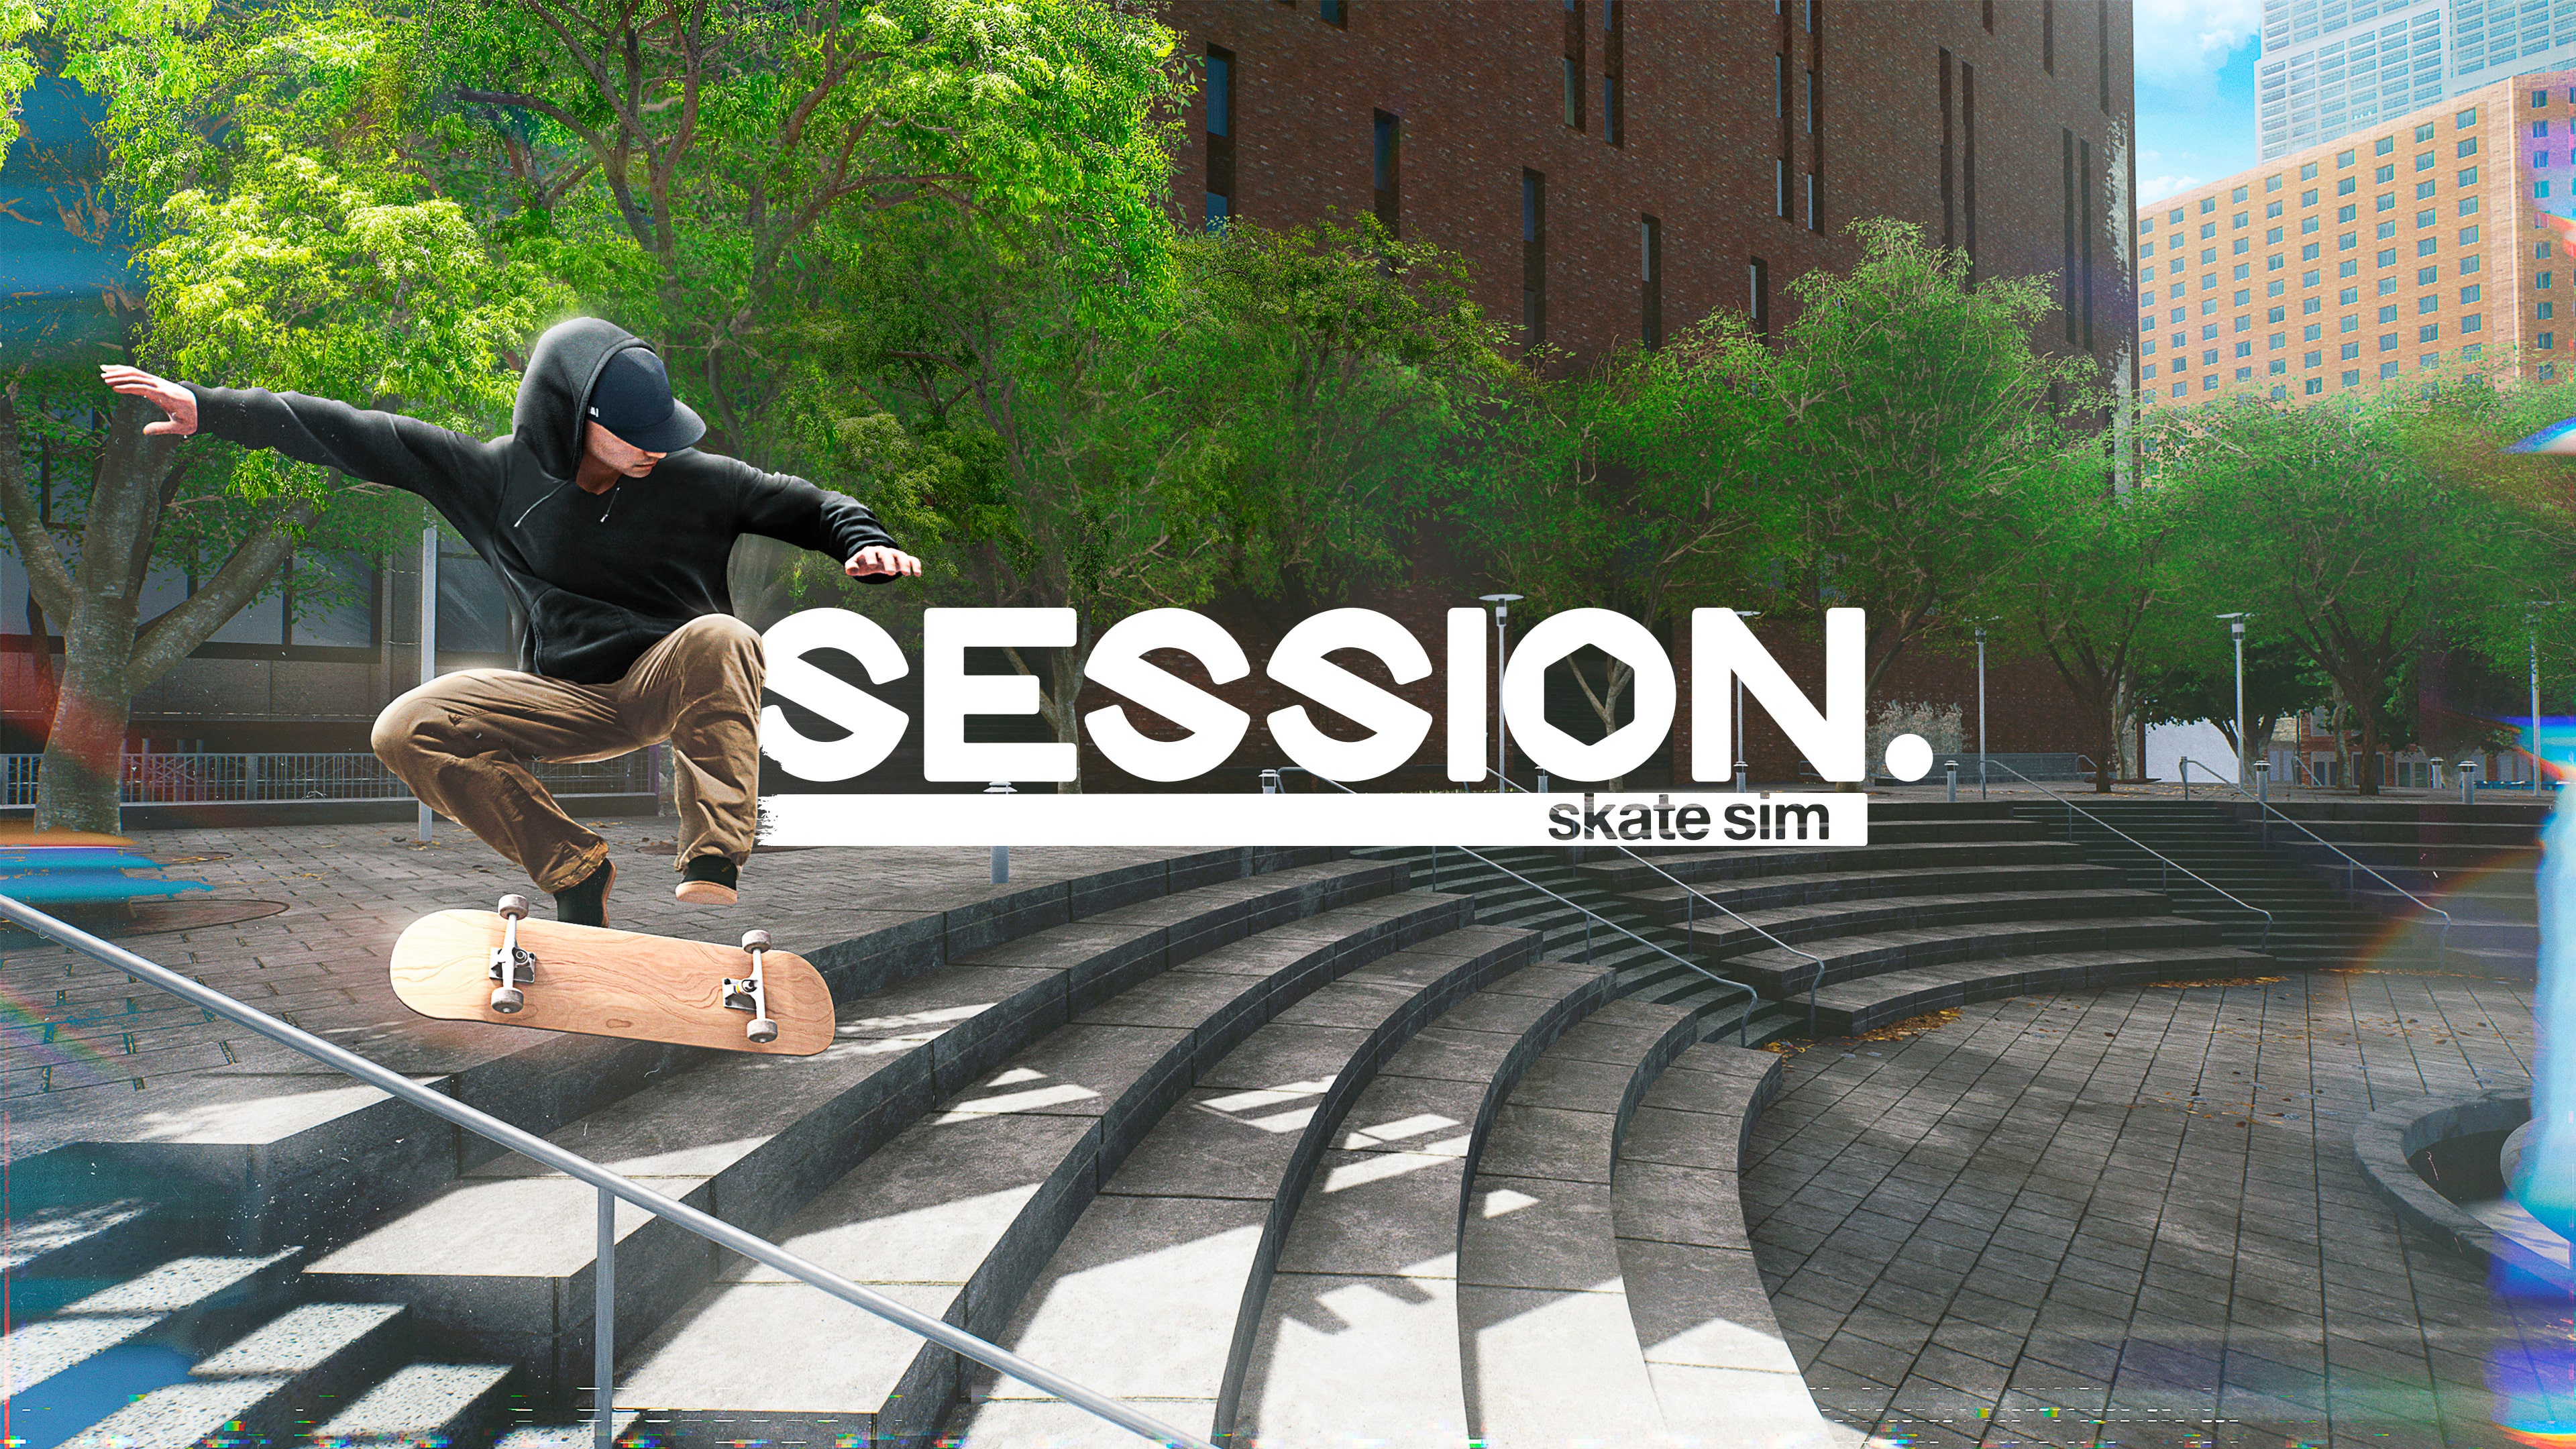 Session Skate Sim - PS4 - Brand New, (opened to test) 814290018054